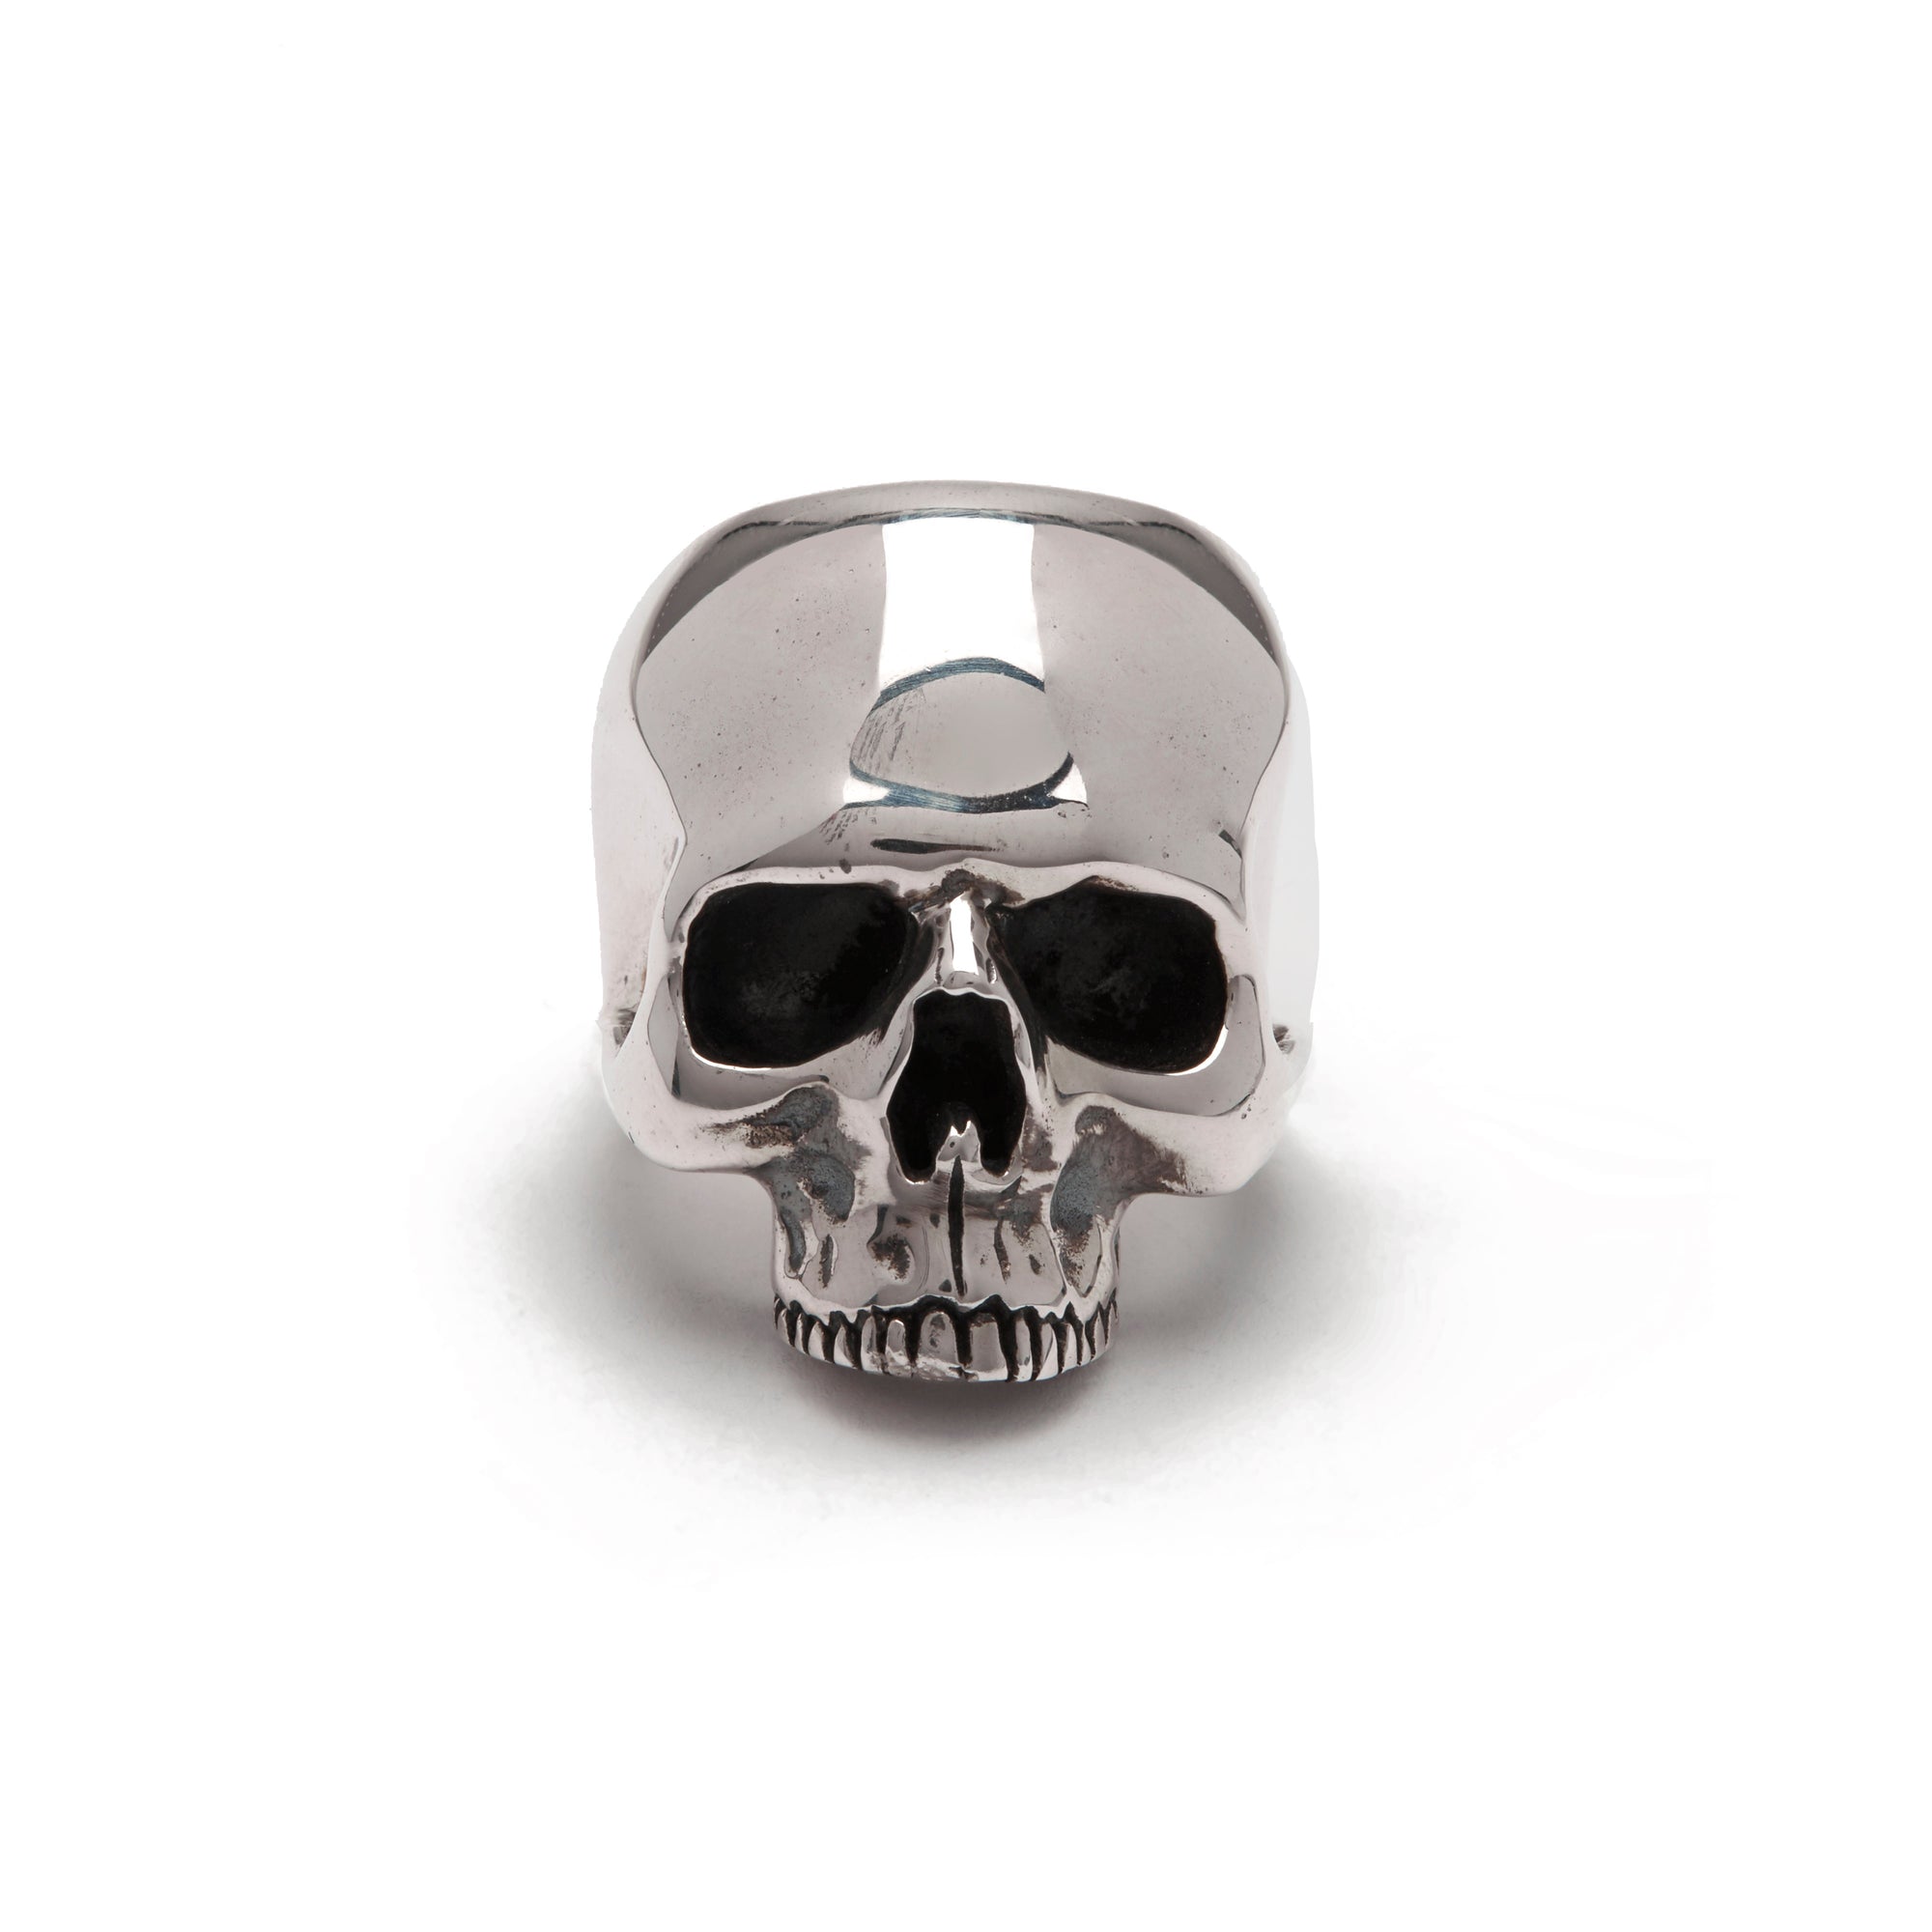 The Great Frog - Jawless Anatomical Skull Ring view 1